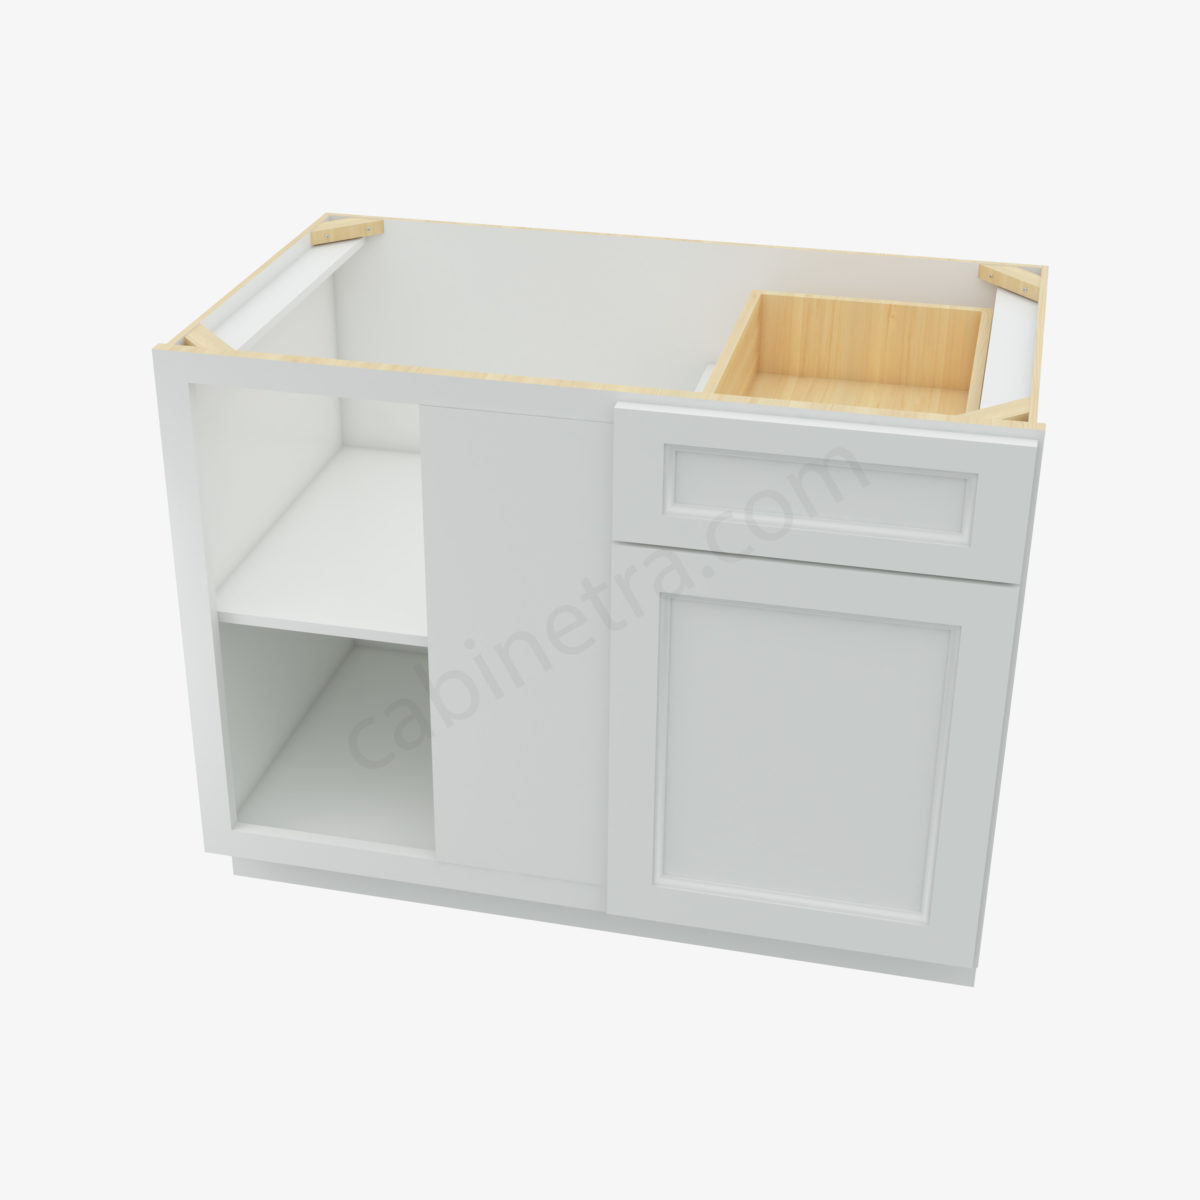 TW BBLC45 48 42W 3 Forevermark Uptown White Cabinetra scaled